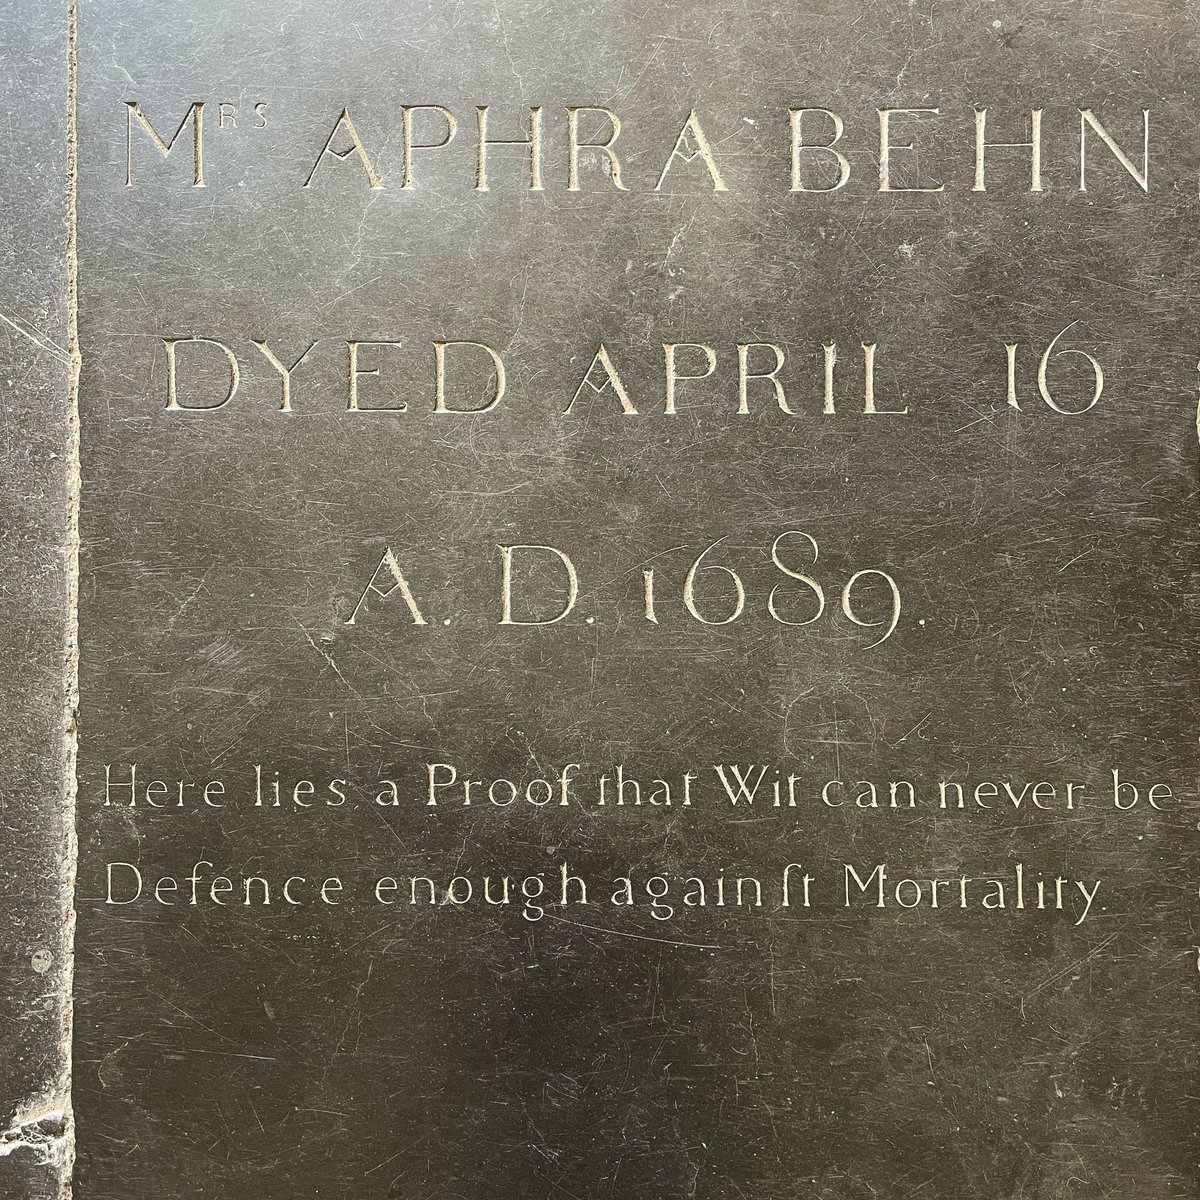 This is the epitaph for the first Englishwoman who made her own living as a writer. Can’t tell if it’s a compliment or a takedown but either way this quote is going into my next book. #AphraBehn #WritingCommunity